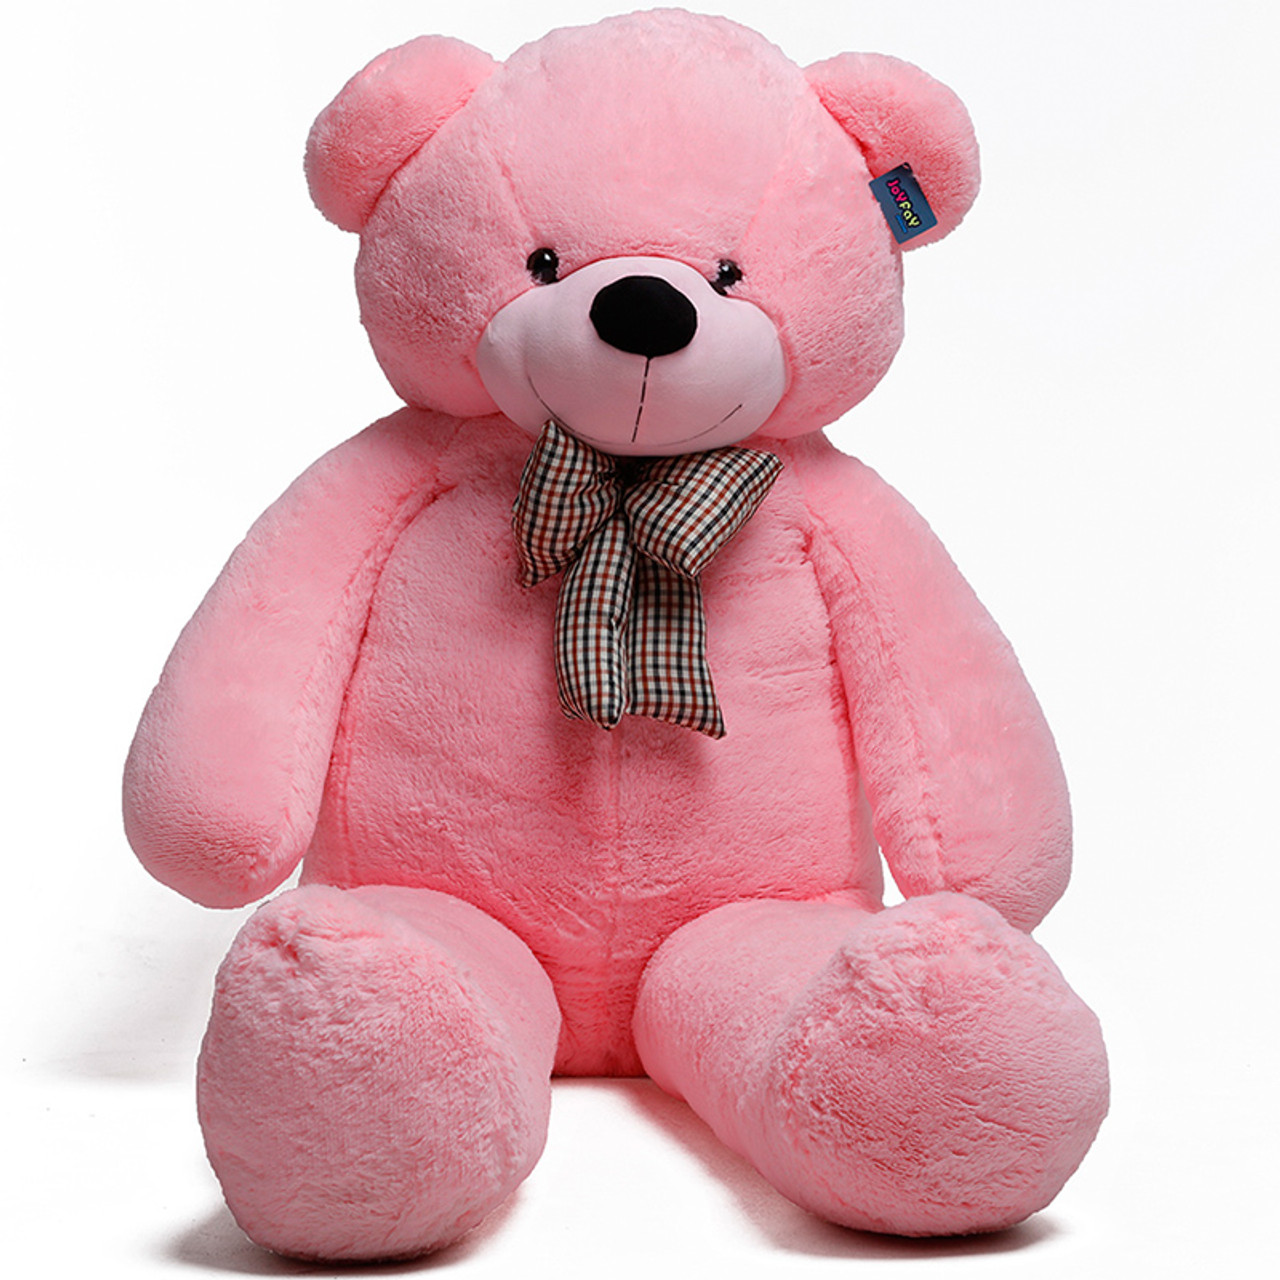 Giant Pink Teddy Bear, 6.5 ft Life Sized Soft Stuffed Toy